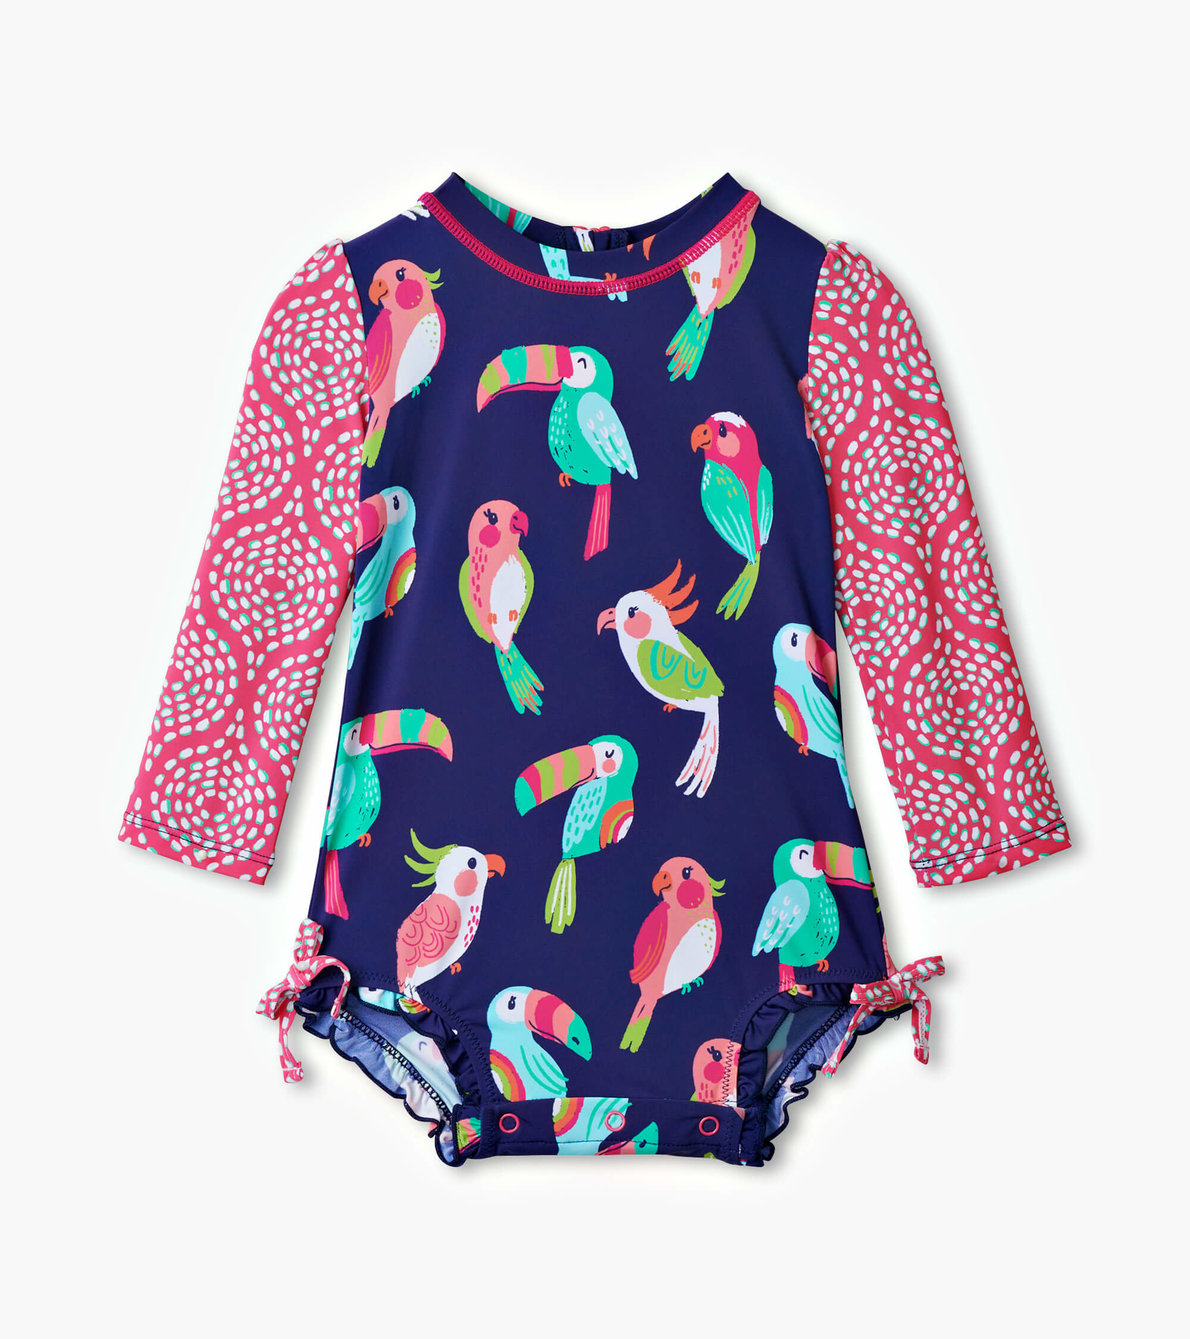 View larger image of Tropical Birds Baby Rashguard Swimsuit